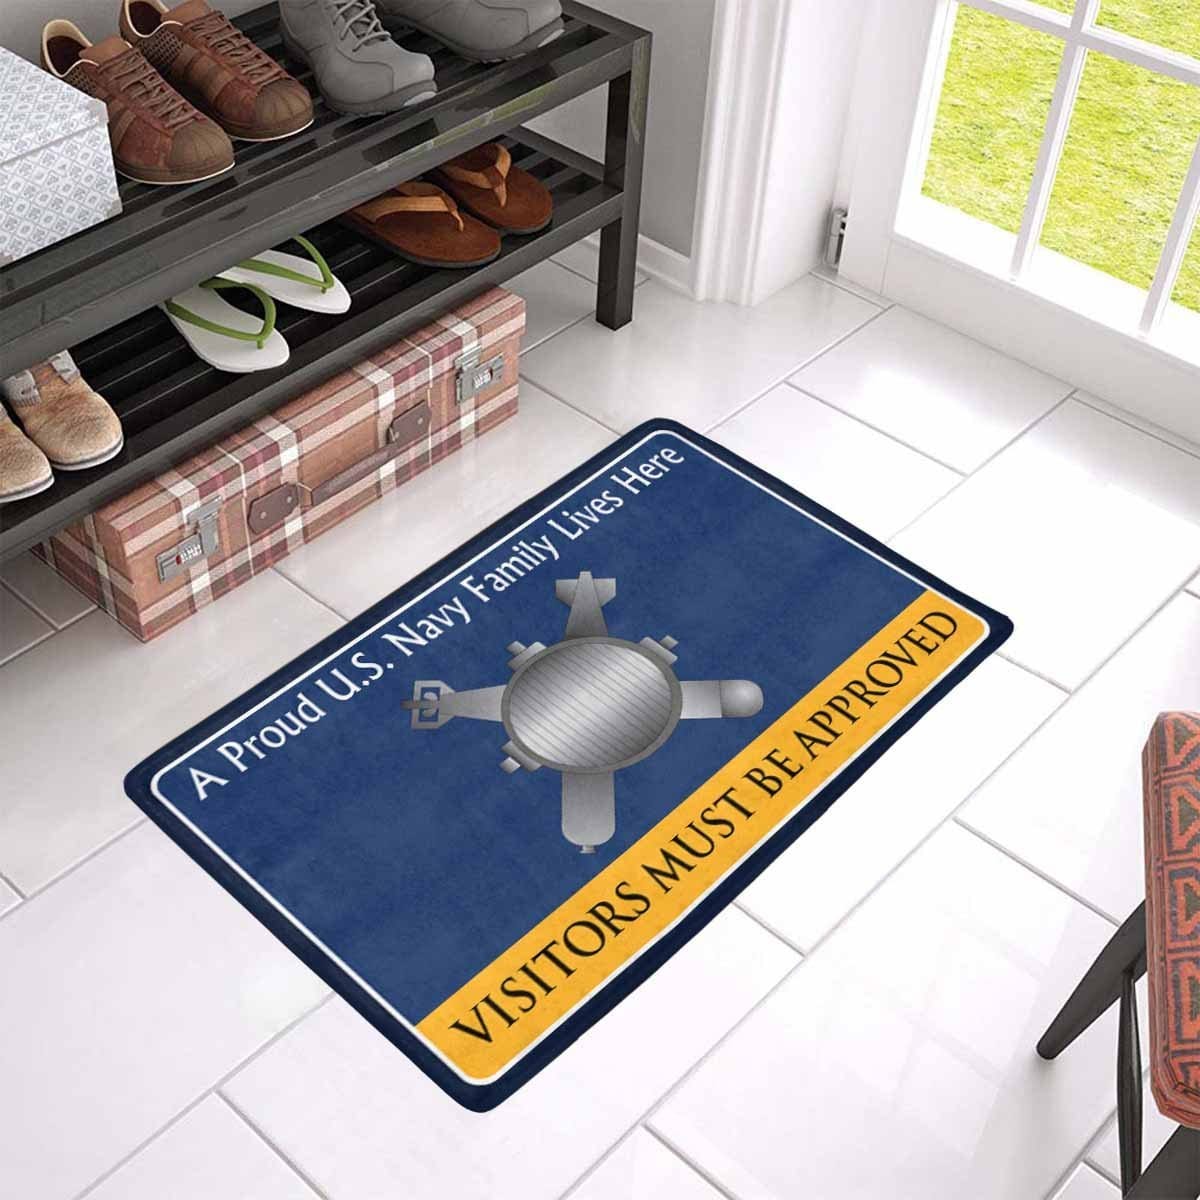 Navy Explosive Ordnance Disposal Navy EOD Family Doormat - Visitors must be approved (23,6 inches x 15,7 inches)-Doormat-Navy-Rate-Veterans Nation